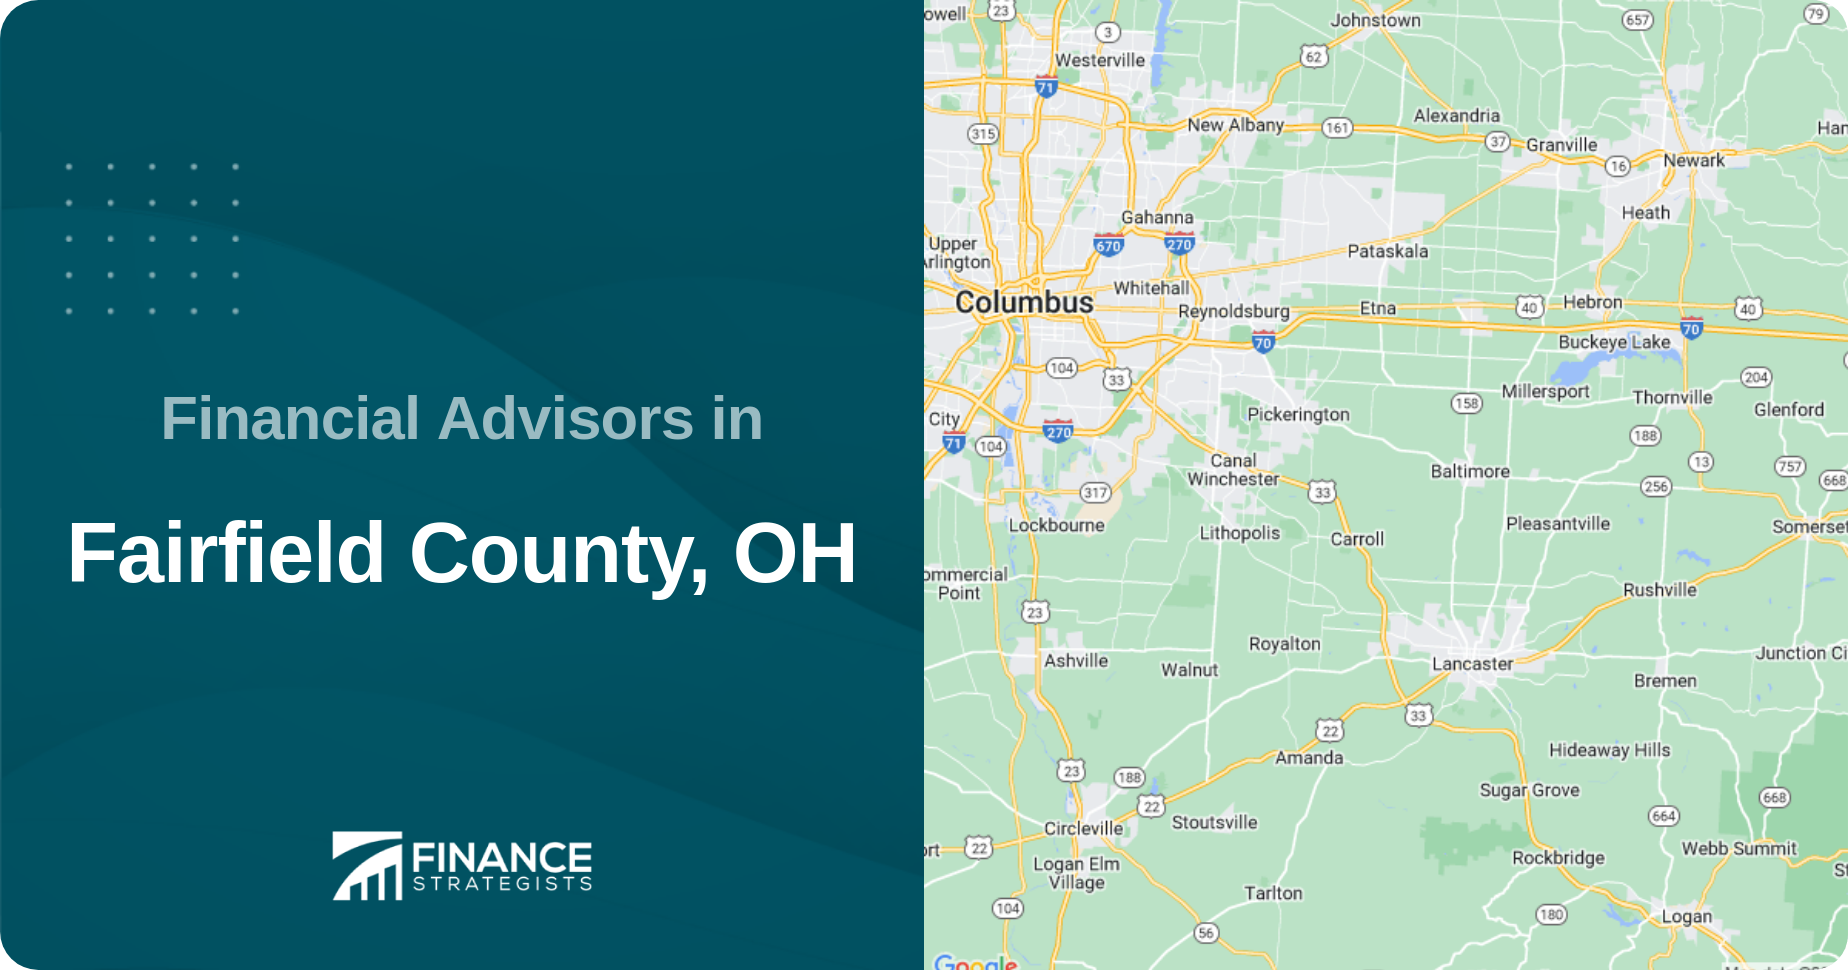 Financial Advisors in Fairfield County, OH